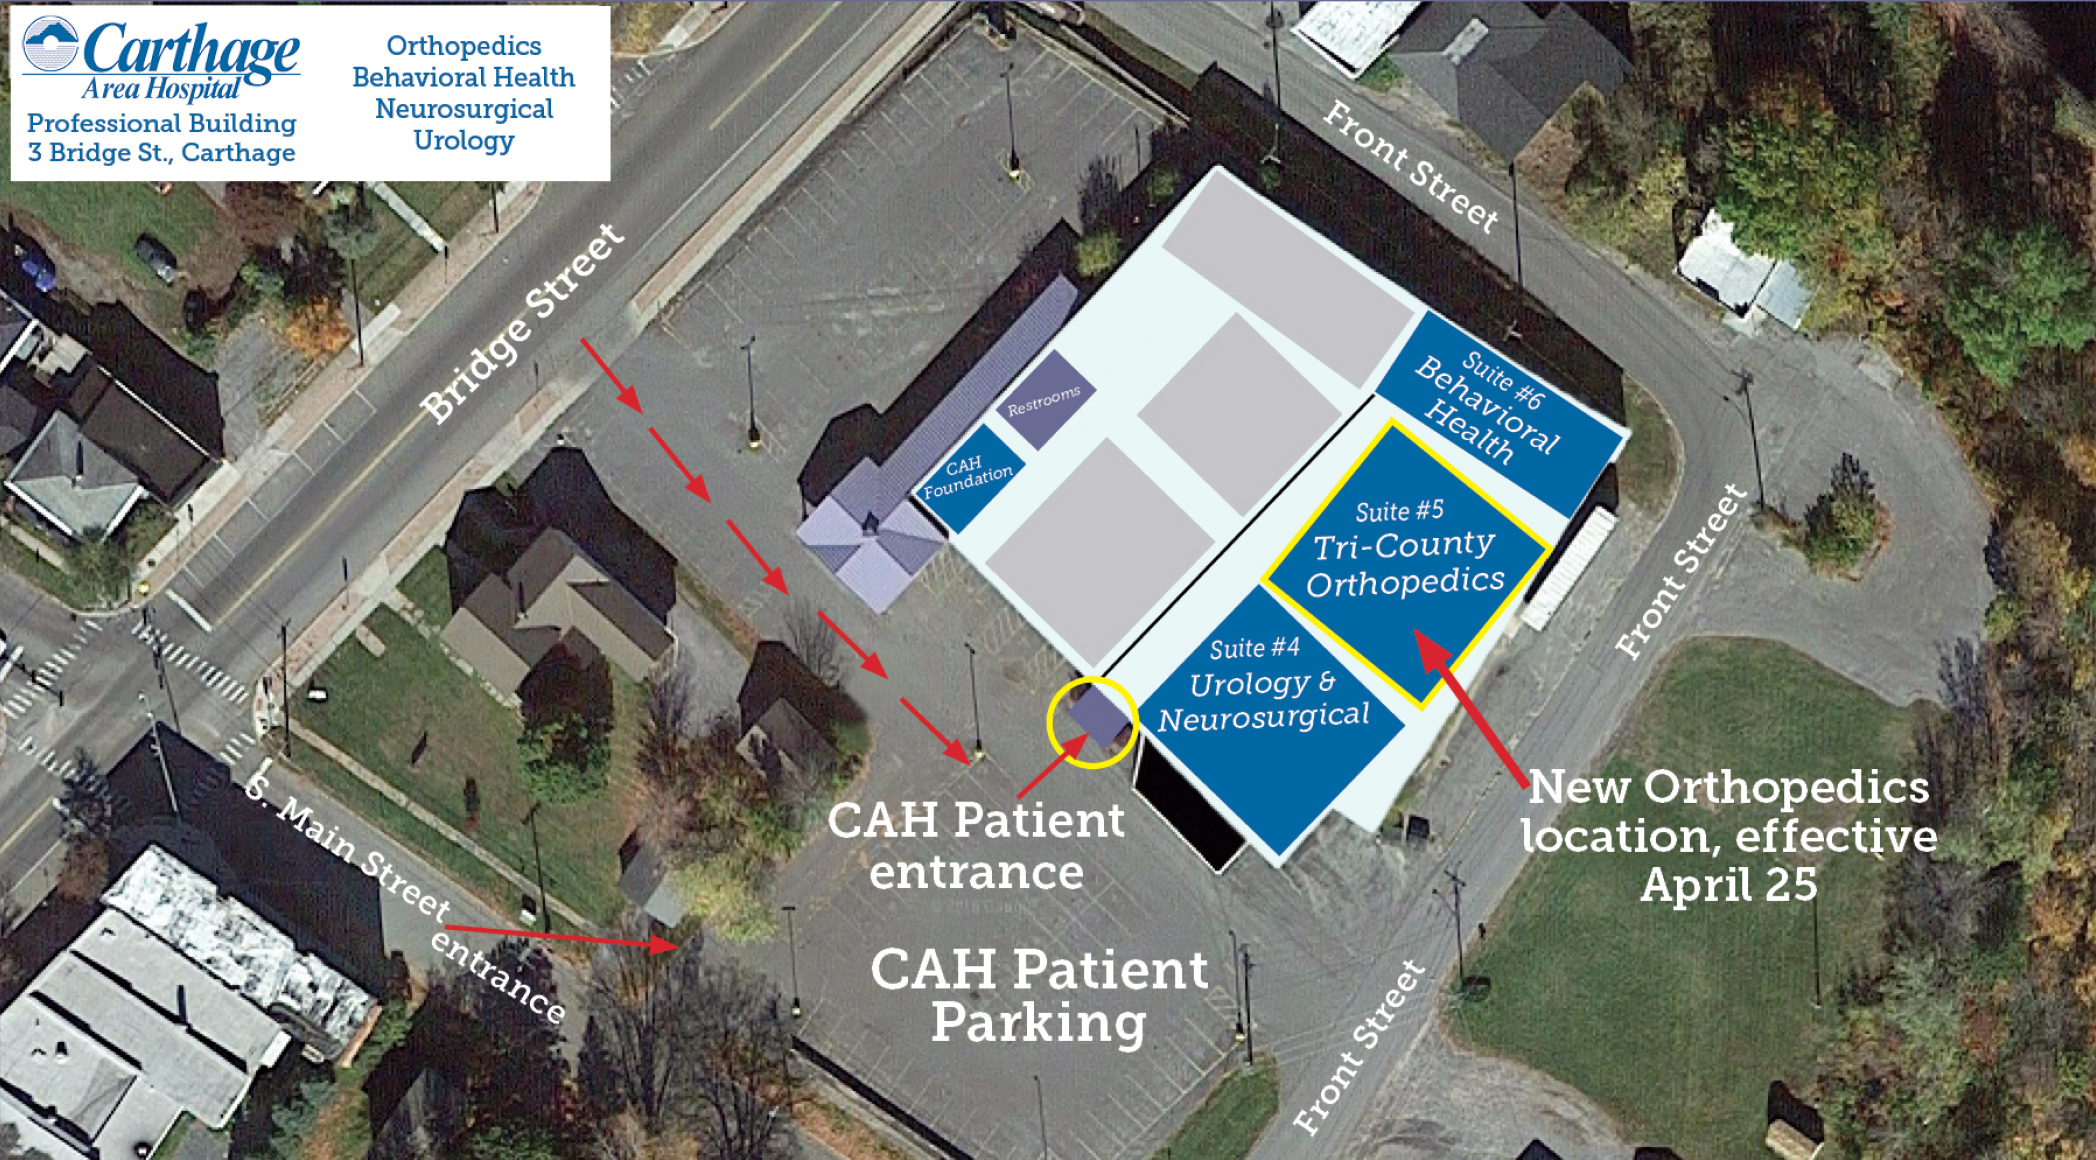 Overhead View of Carthage Area Hospital with Spot for New Orthopedic Location